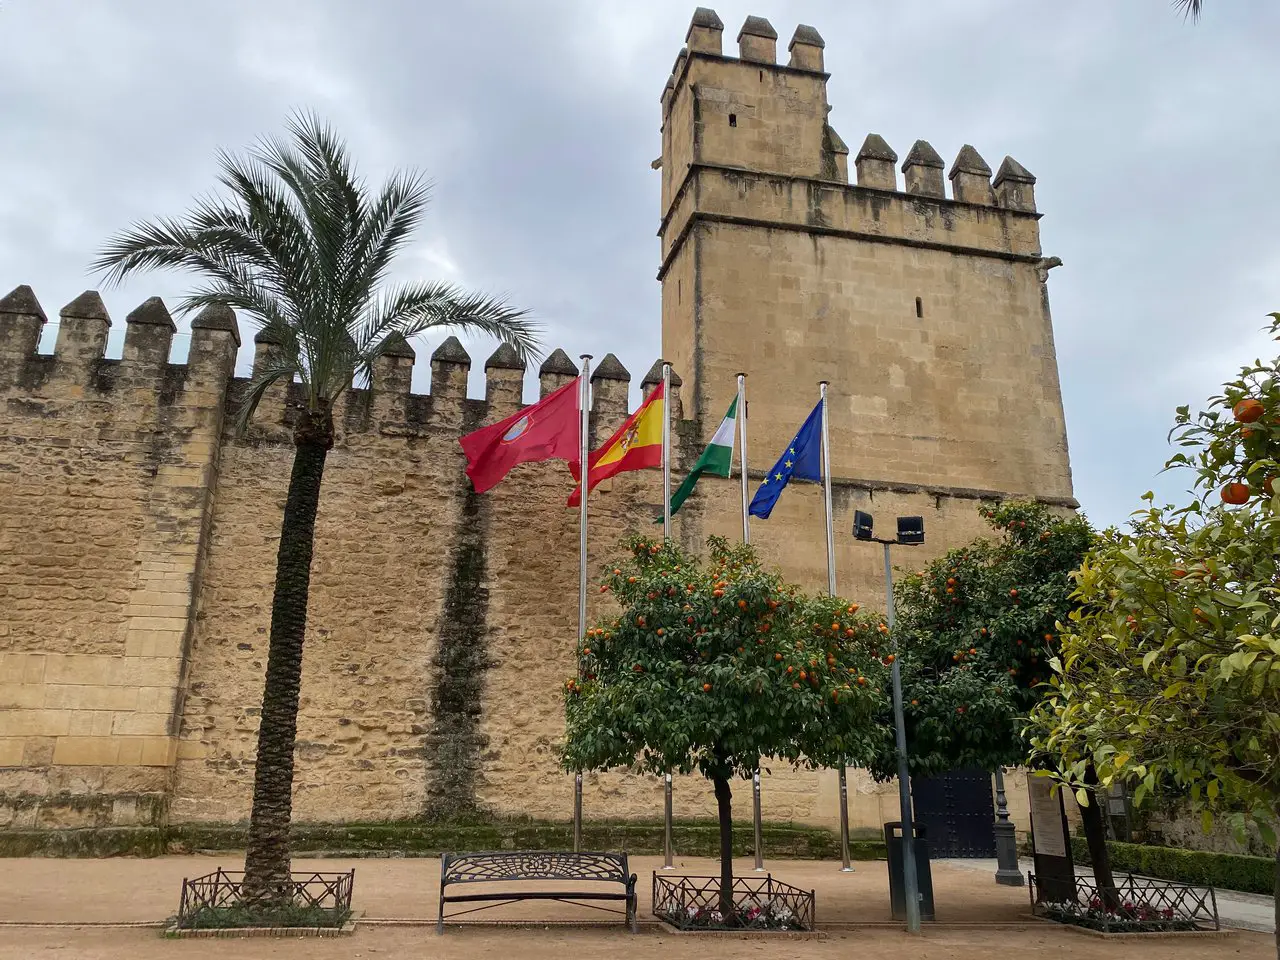 Exterior of the Alcazar of the Christian Monarchs. A tall castle tower stands behind numerous flags fluttering in the wind.